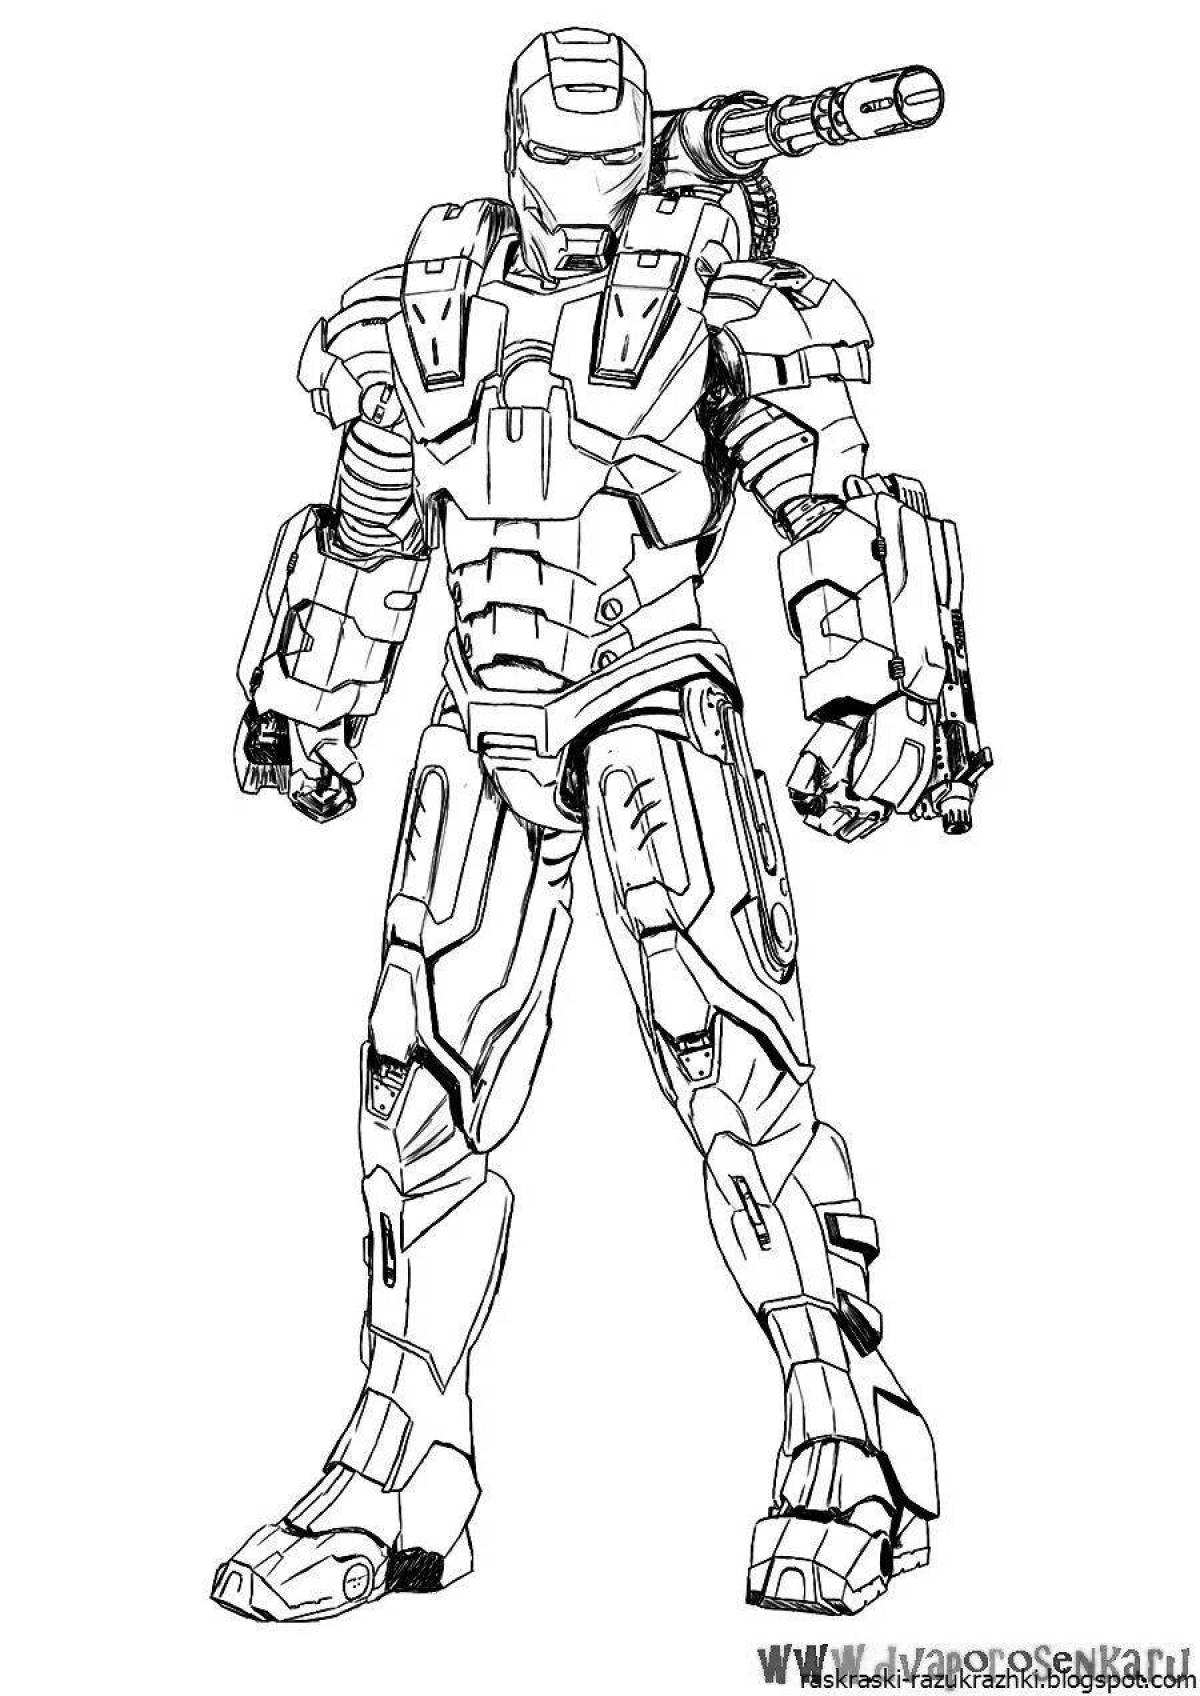 Great iron man coloring book for boys